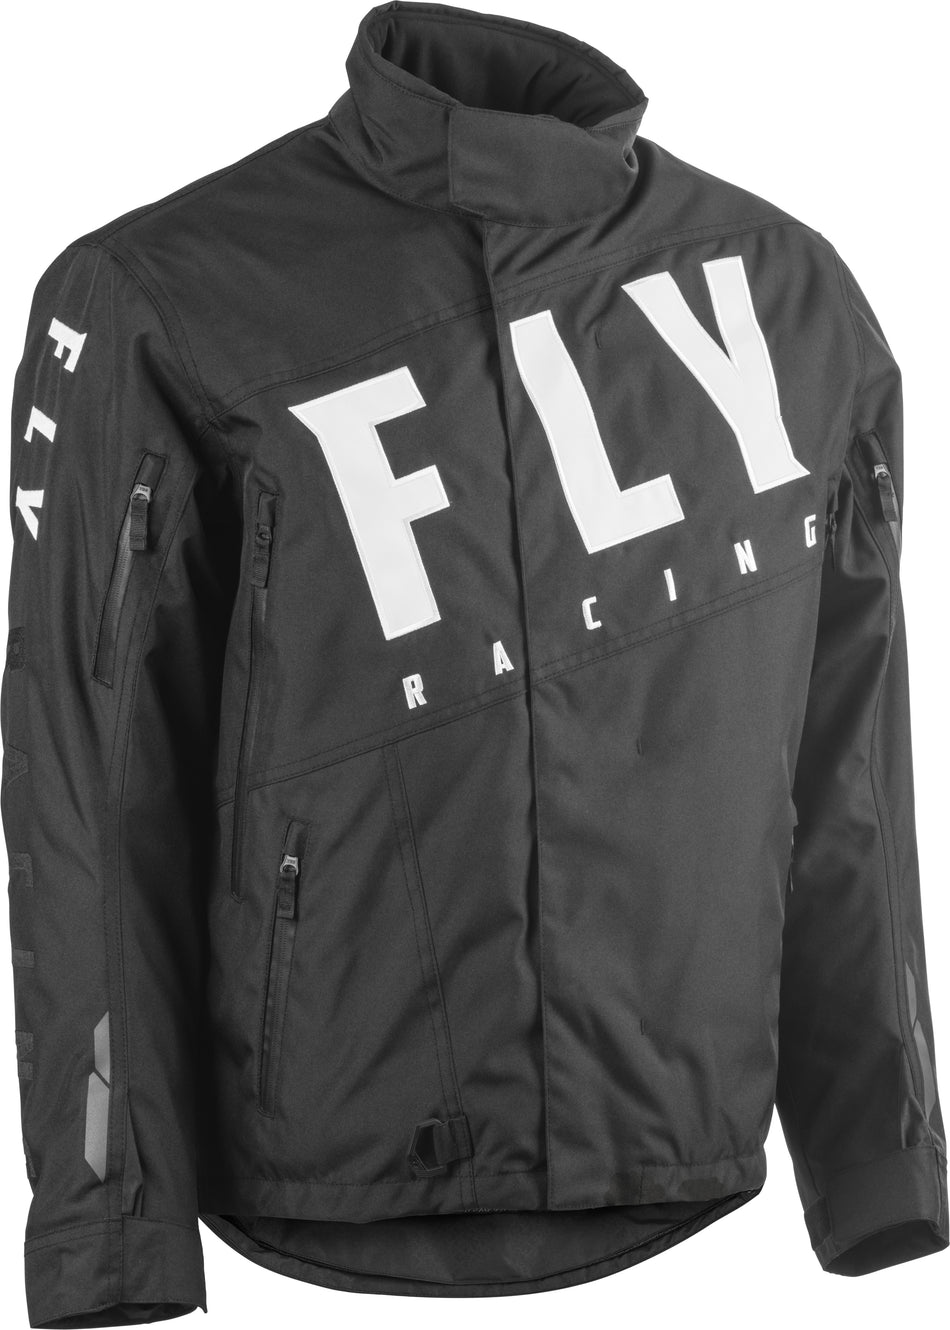 FLY RACING Fly Snx Pro Jacket Black Sm 470-4110S